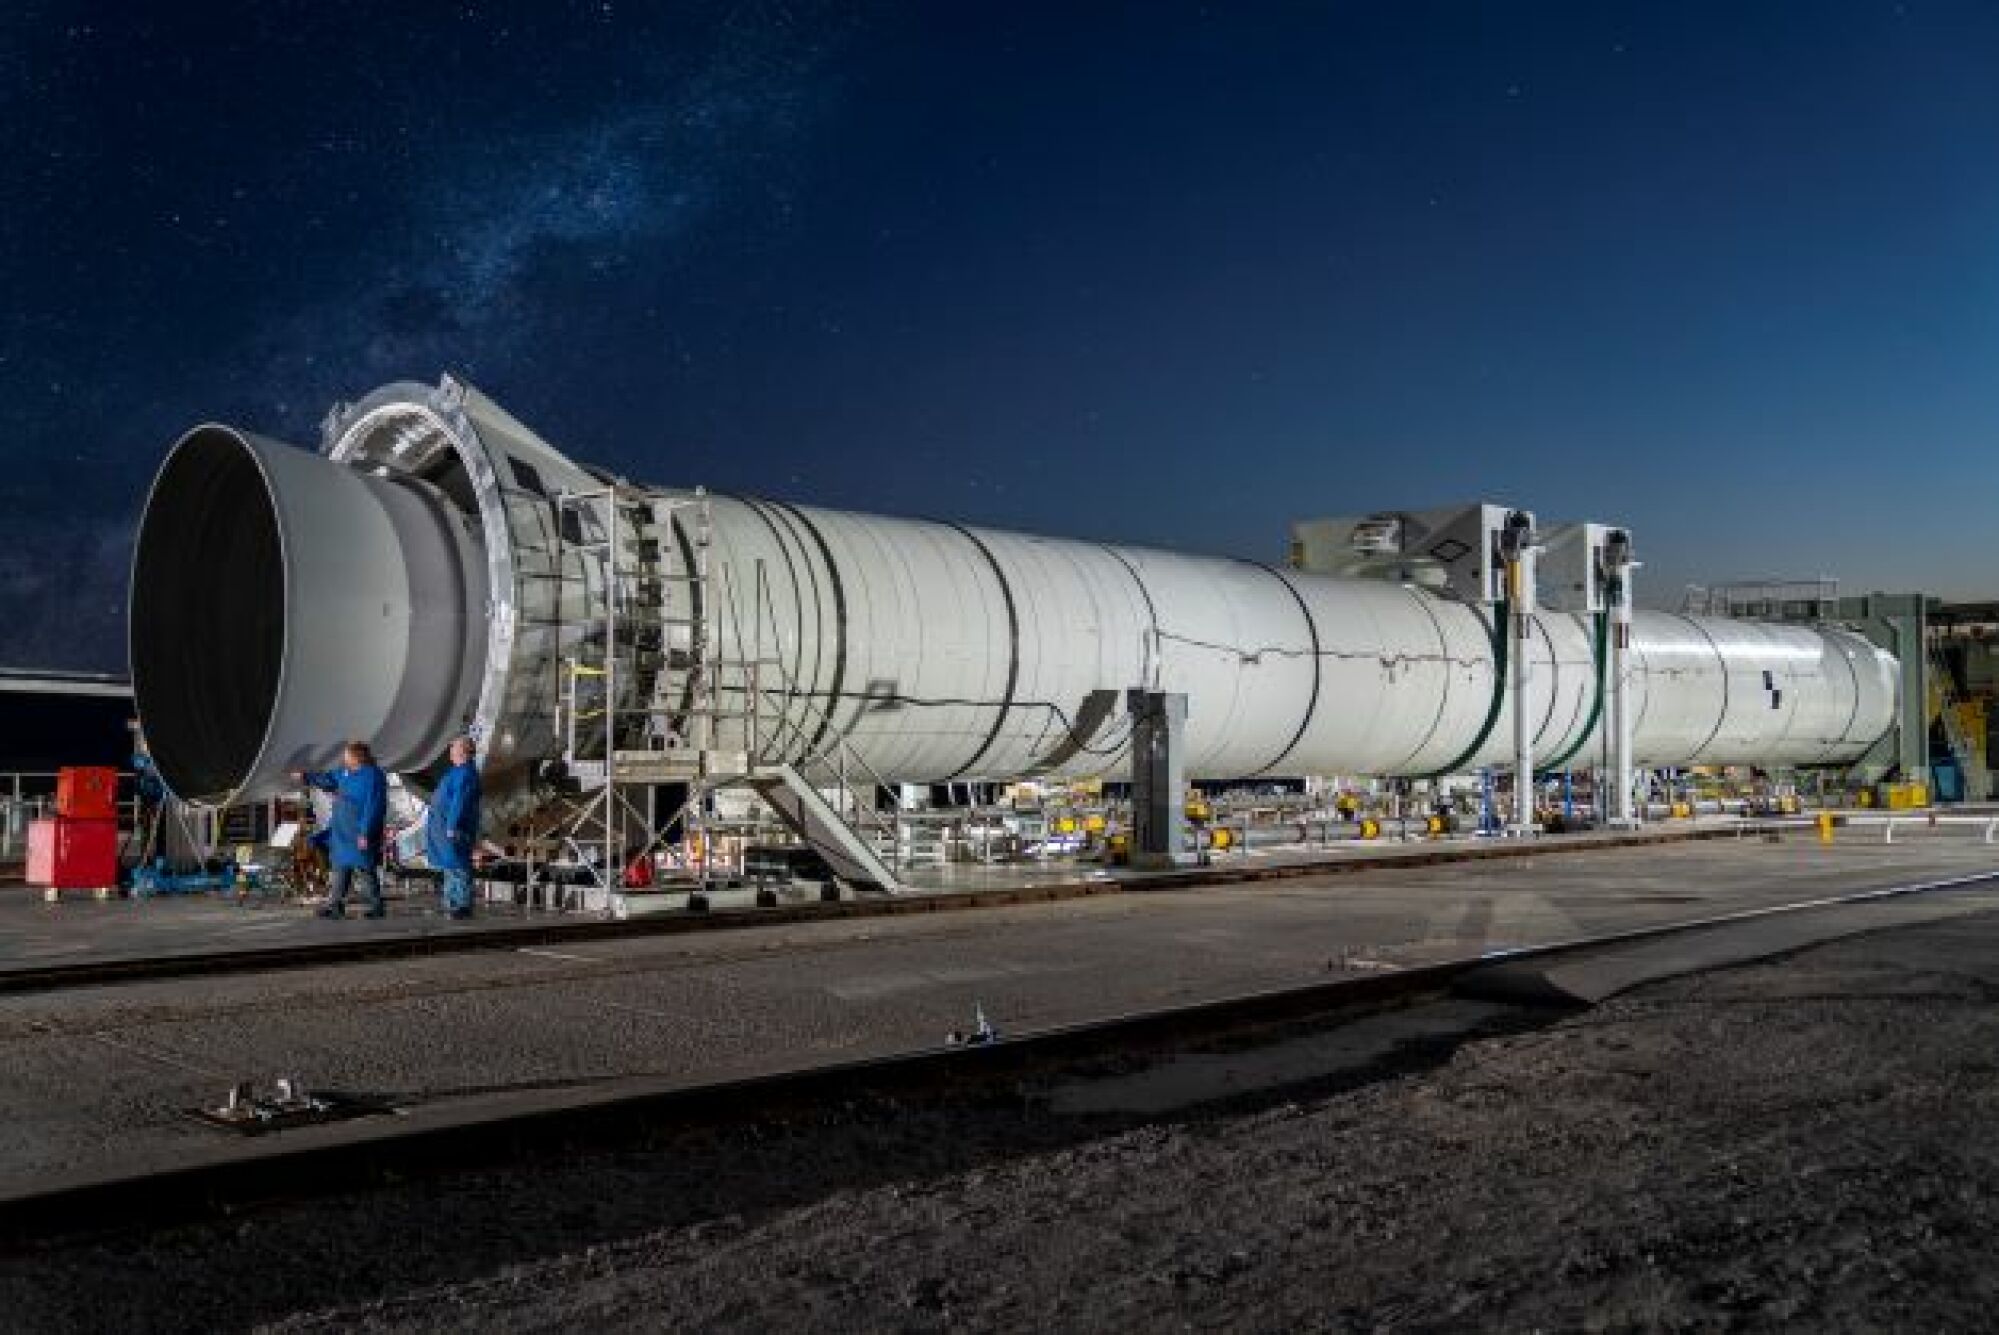 engineers testing an SLS solid rocket booster